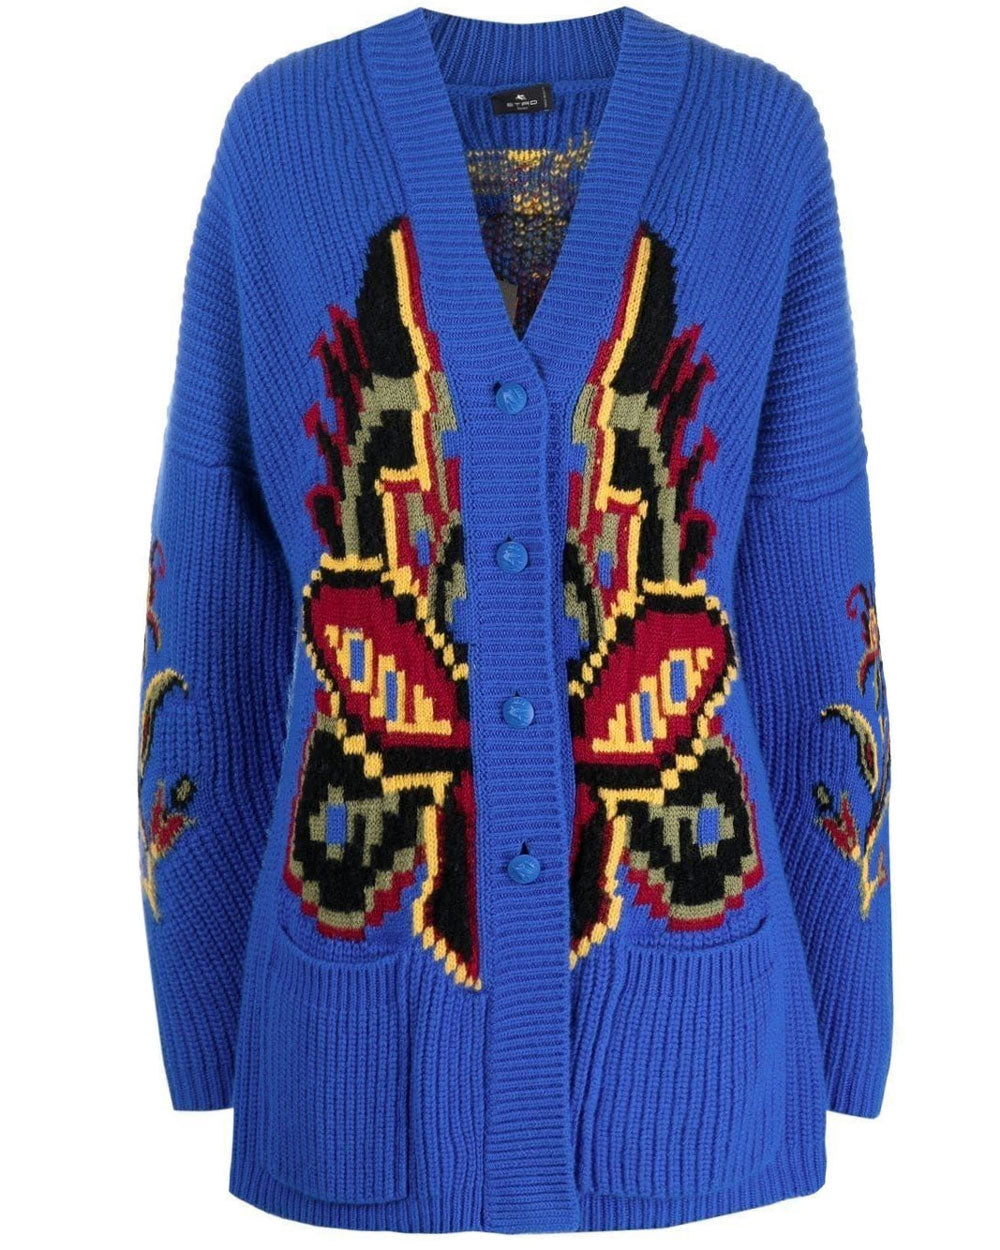 Blue Maglia Cappotto Onfale Knit Cardigan